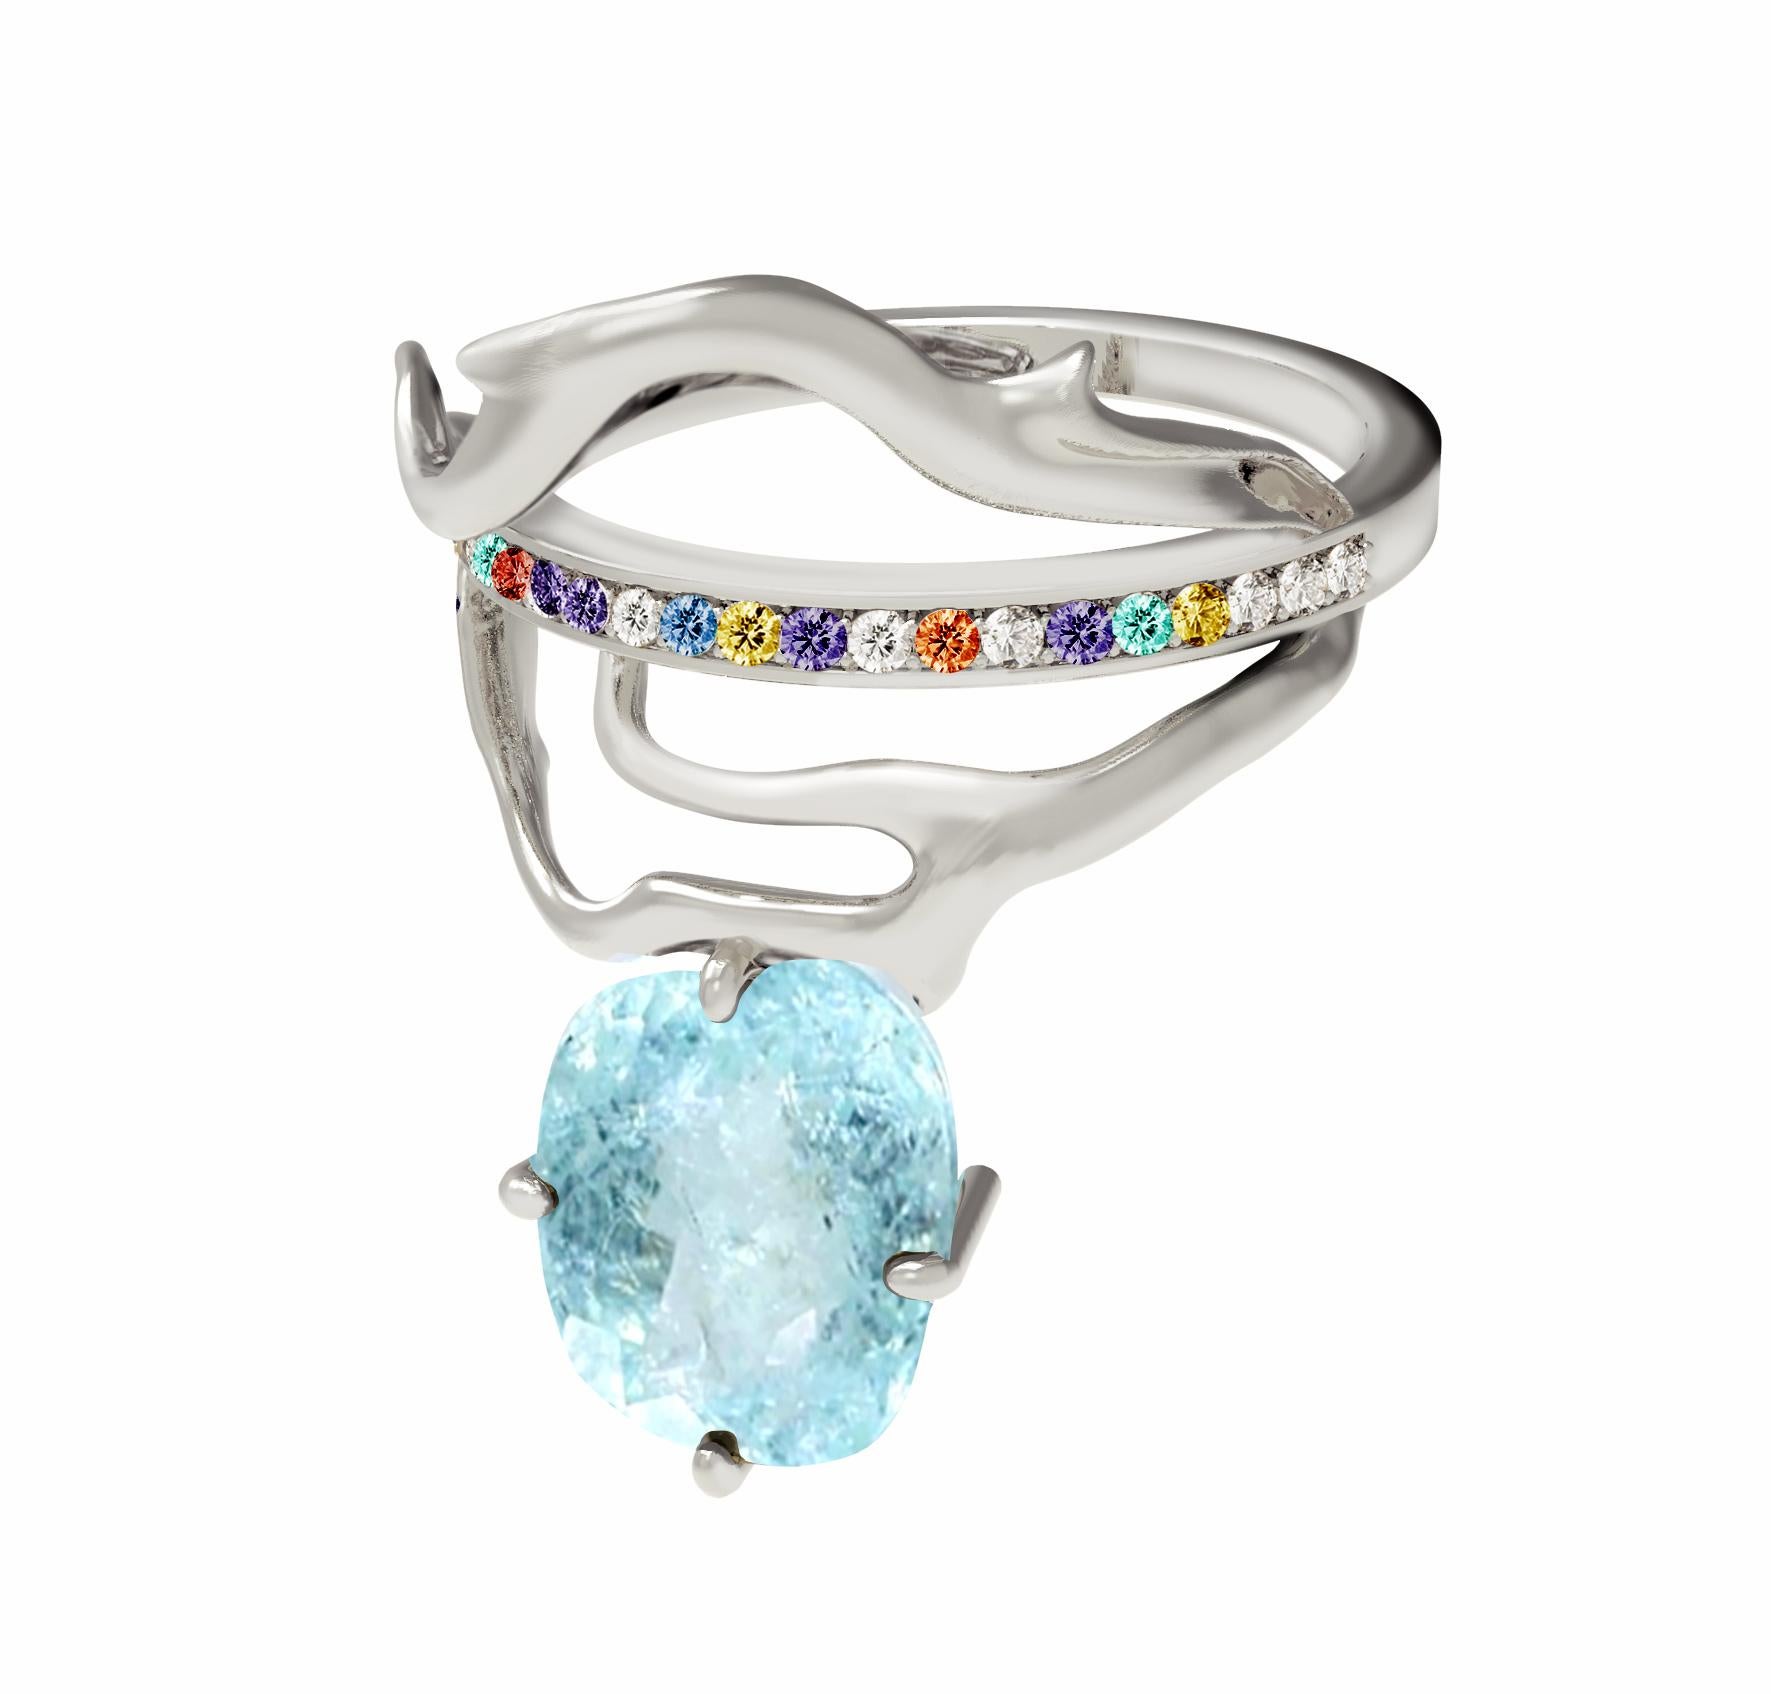 An unusual form makes this Tibetan 18 karat white gold contemporary ring an art object. It is encrusted with: colourful sapphires, diamonds, emeralds and oval paraiba tourmaline  (neon copper bearing, 2,4 carats, blue with inclusions). Size is